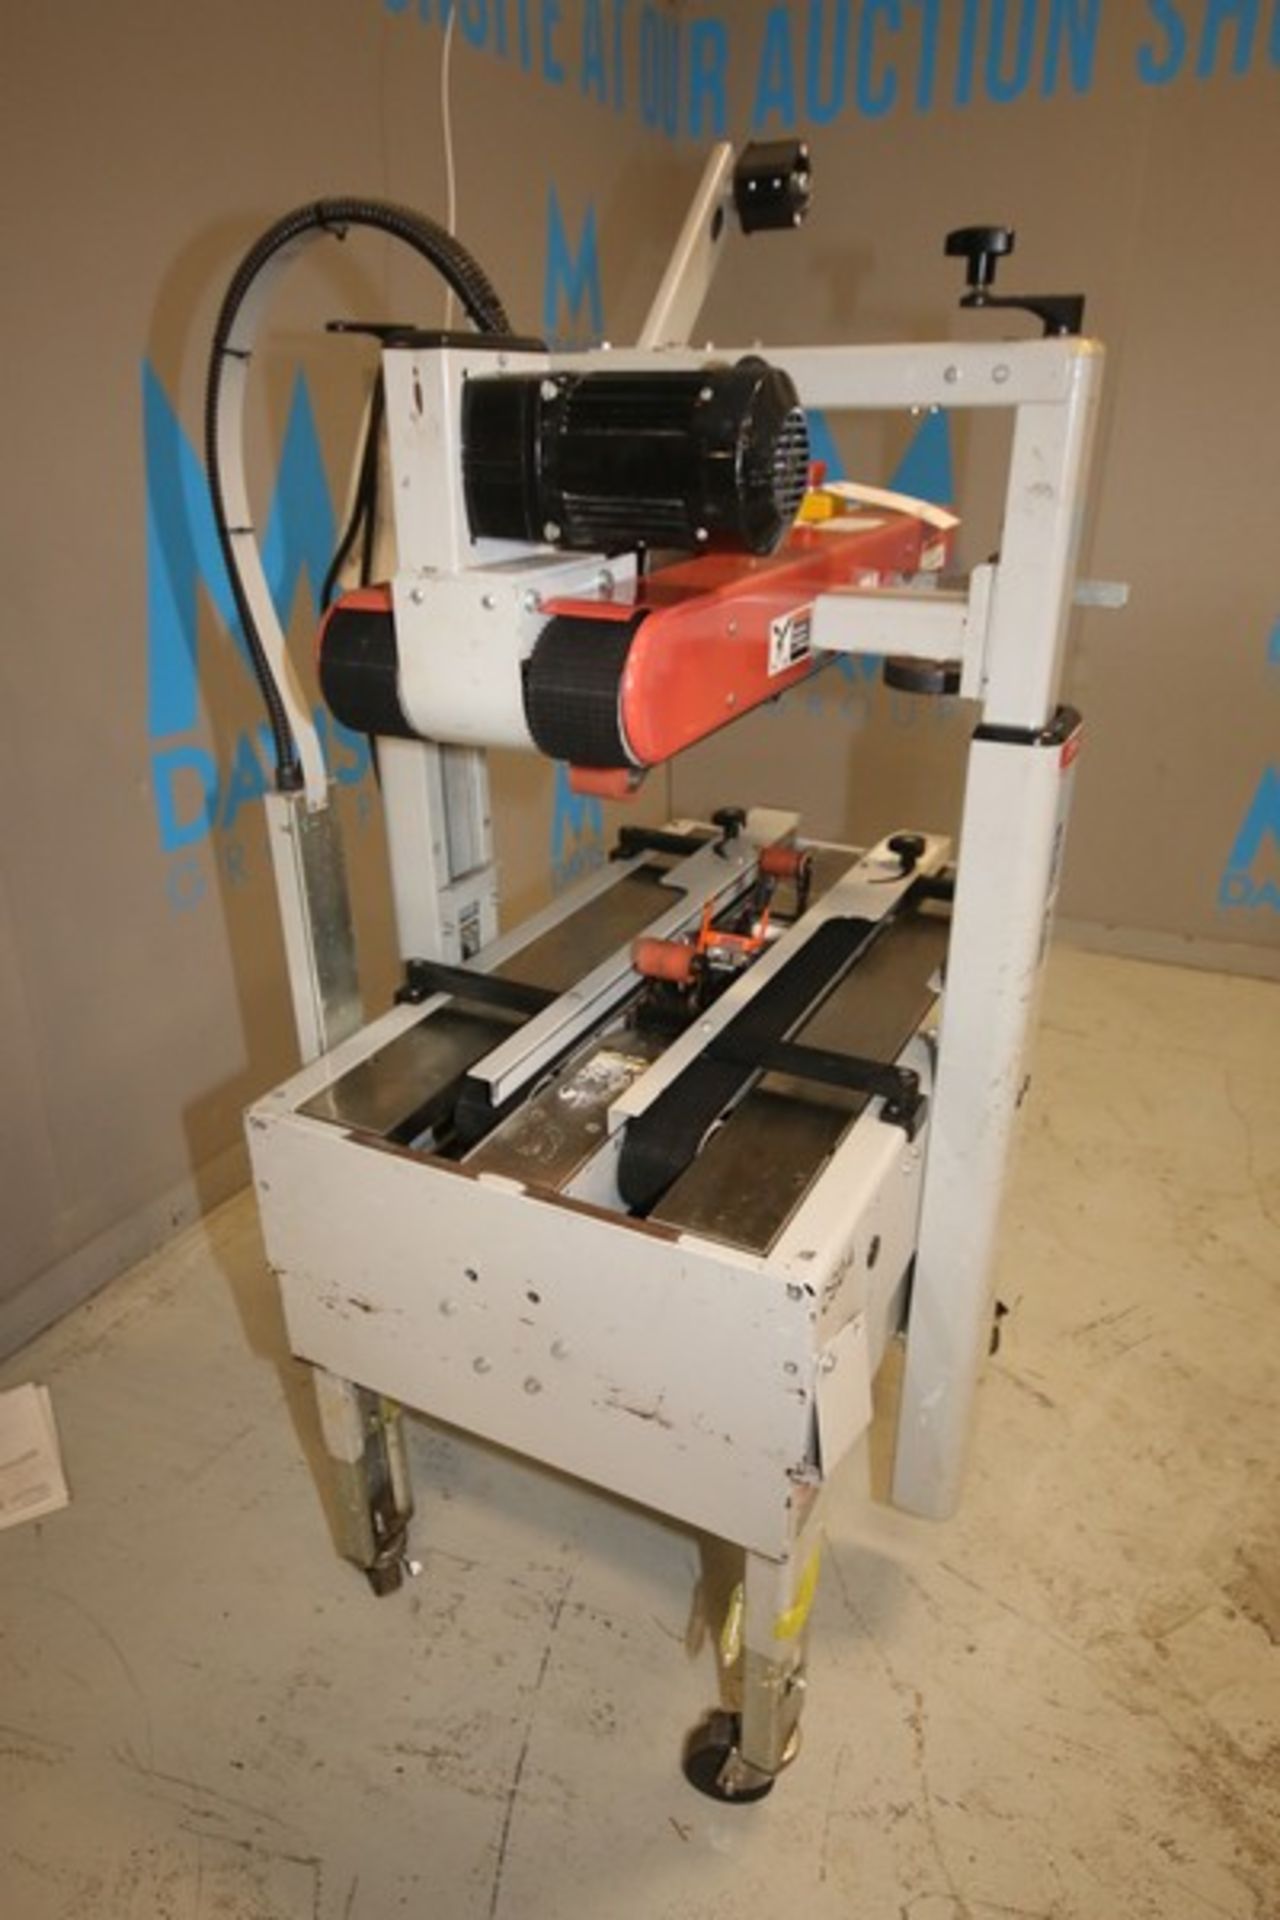 3M-Matic Adjustable Case Sealer, Series 700A, Type: 39600, SN 9732, Includes Top & Bottom Cartridge, - Image 2 of 6